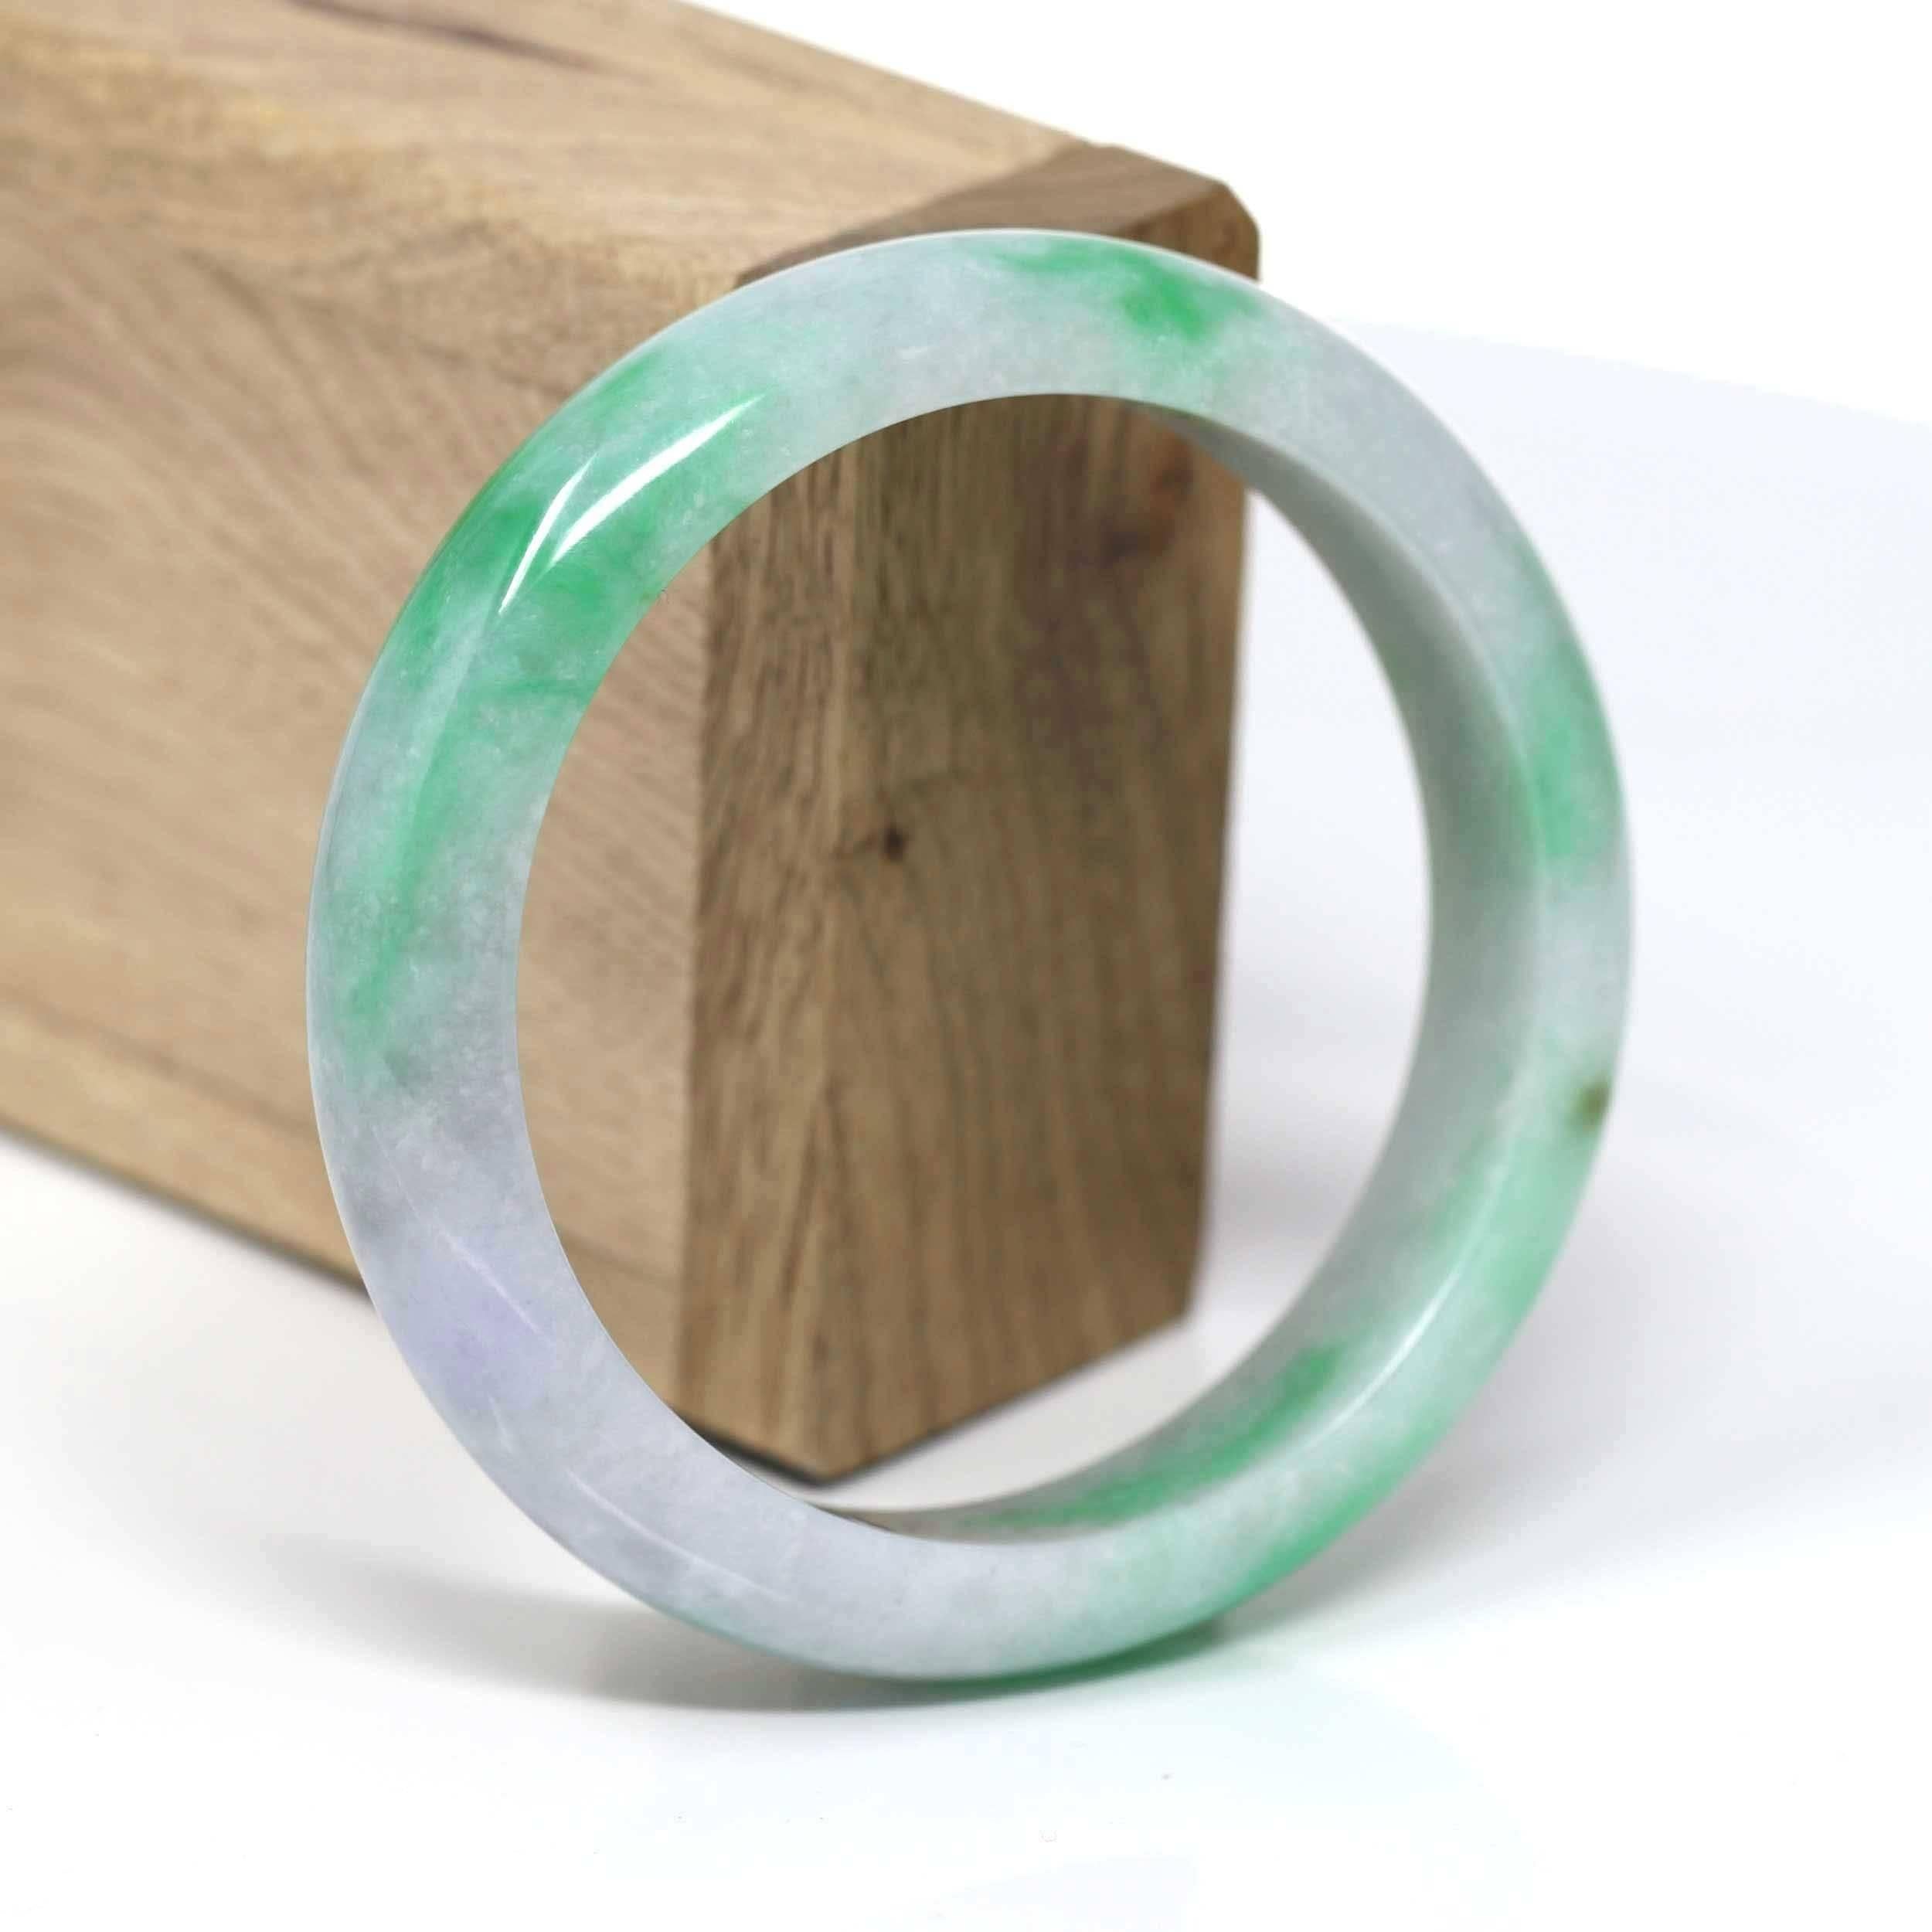 * DETAILS--- Genuine Burmese Jadeite Jade Bangle Bracelet. This bangle is made with high-quality genuine Burmese Jadeite jade, The jade texture is so smooth with vibrant green color and whole lavender colors inside. It looks perfect with vibrant